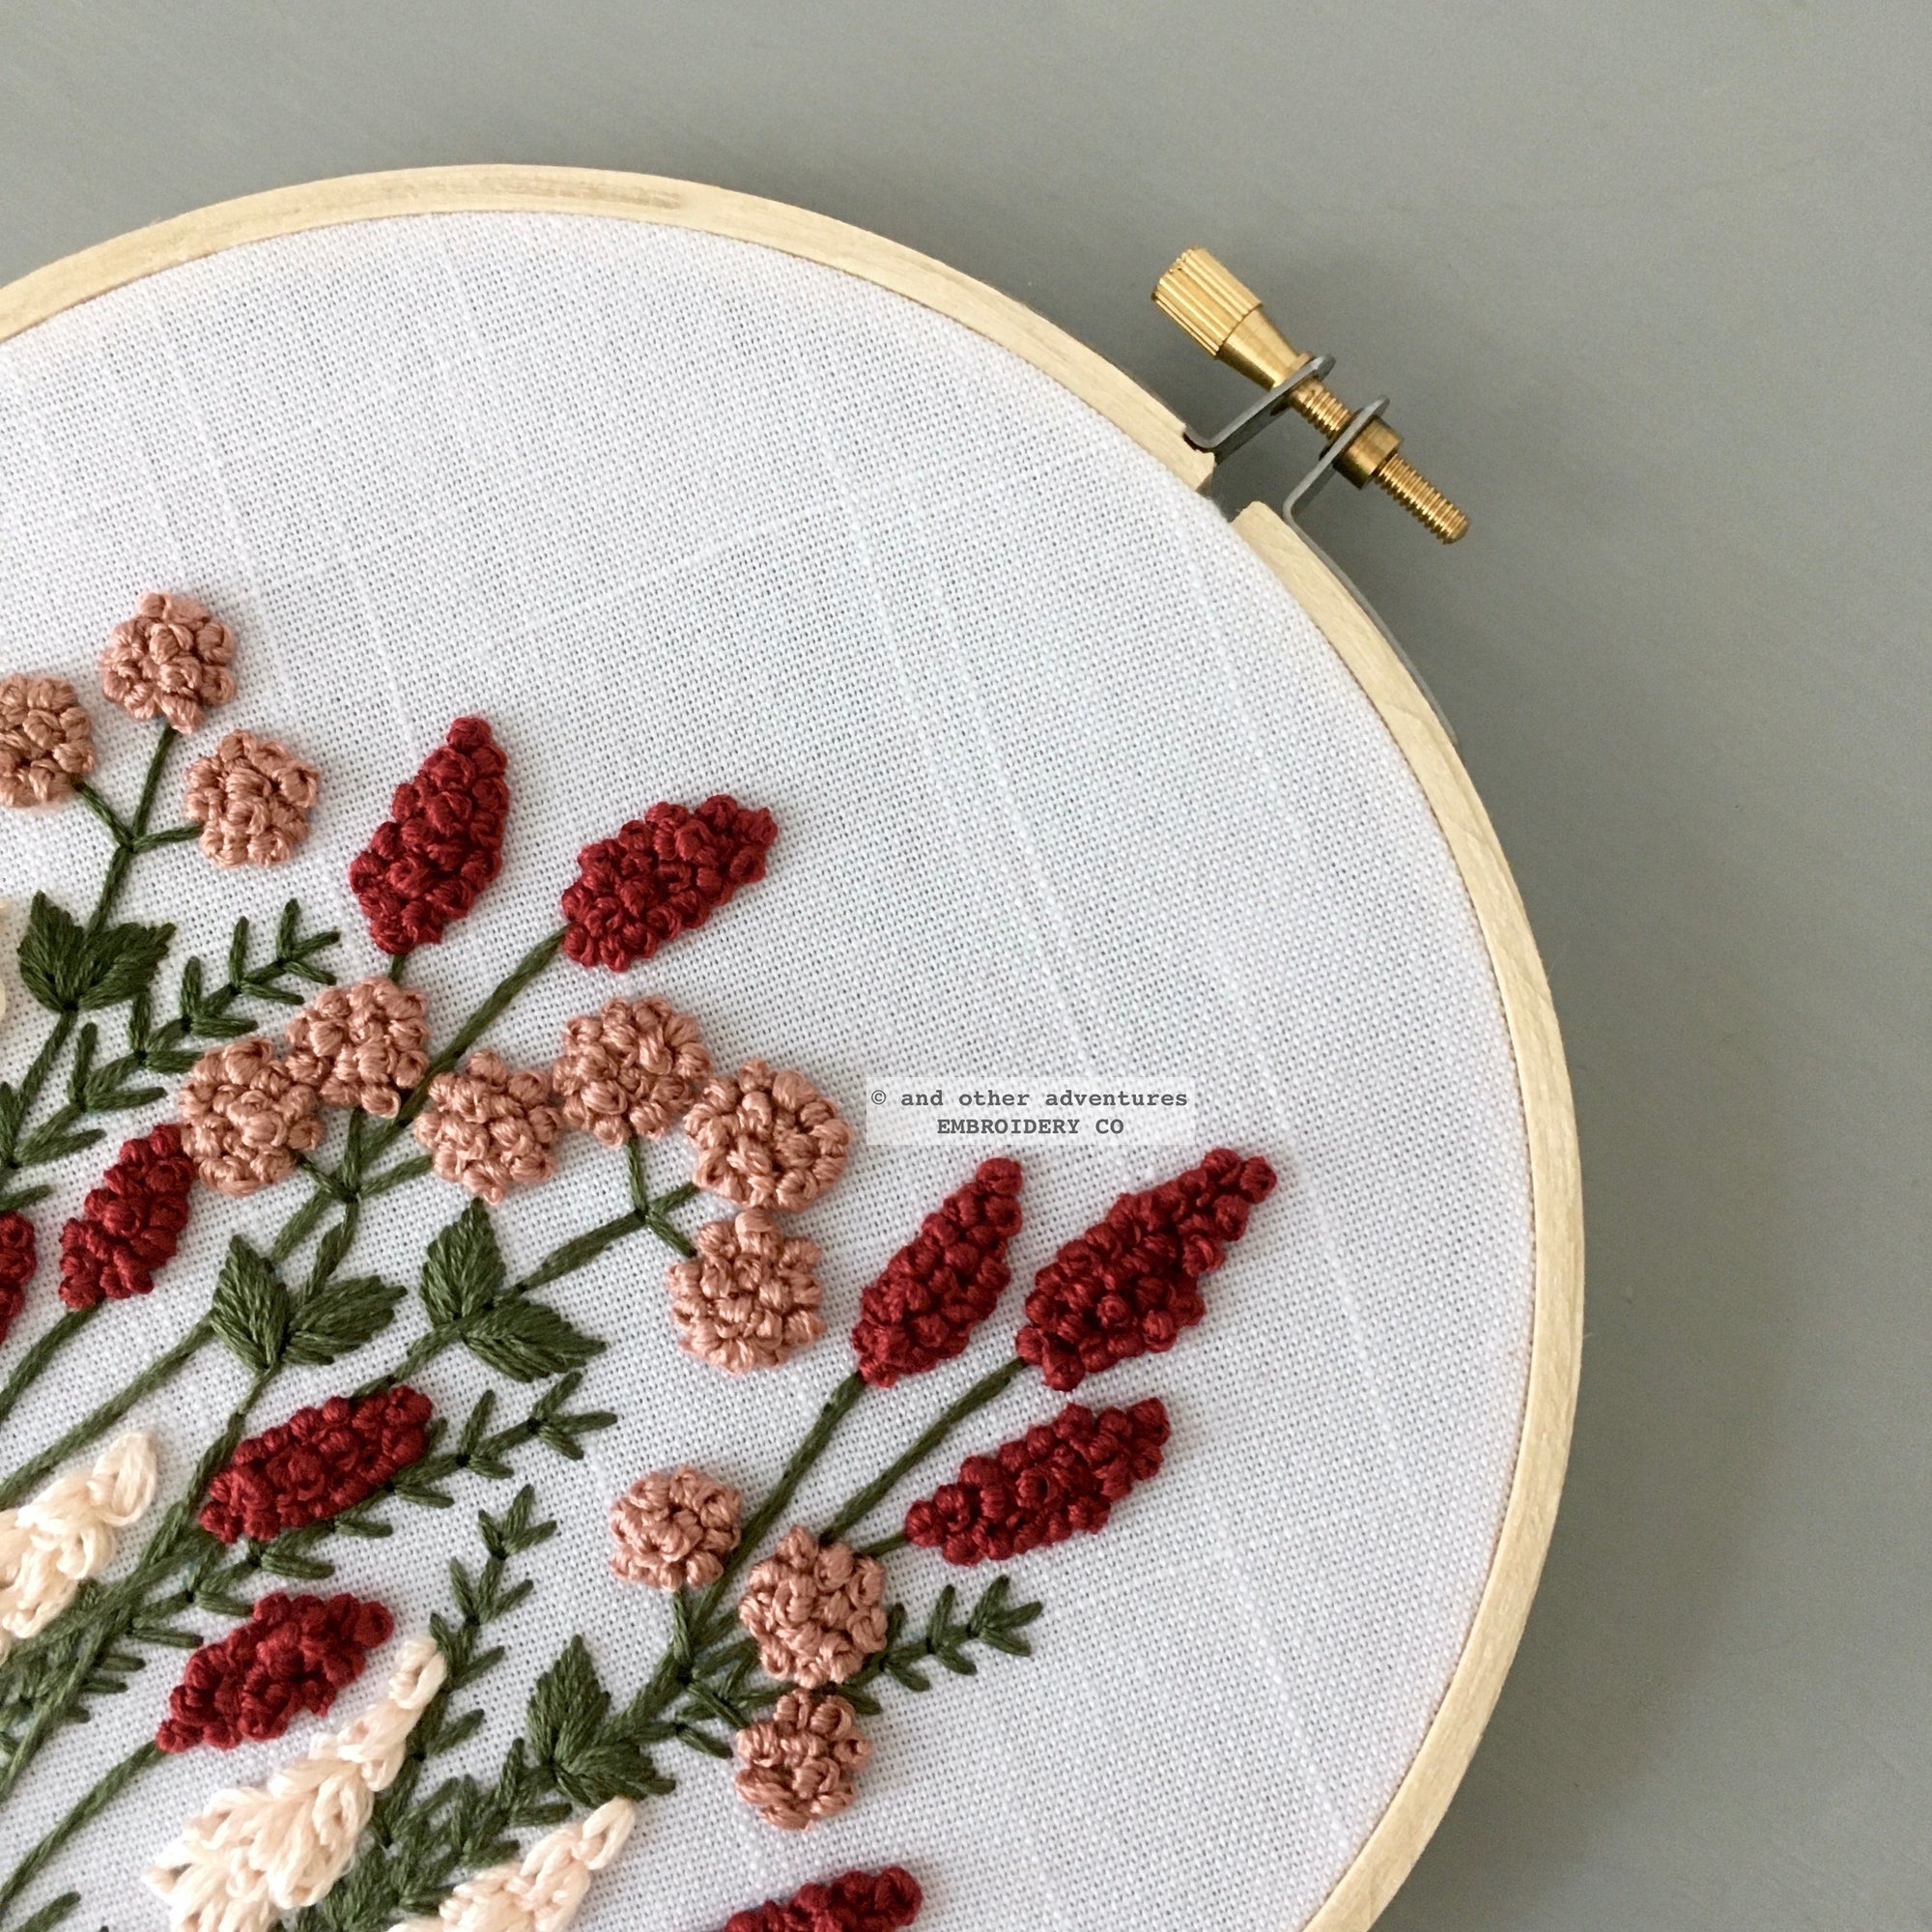 Hand Embroidery Kit for Beginners - Avonlea in Crimson - And Other  Adventures Embroidery Co